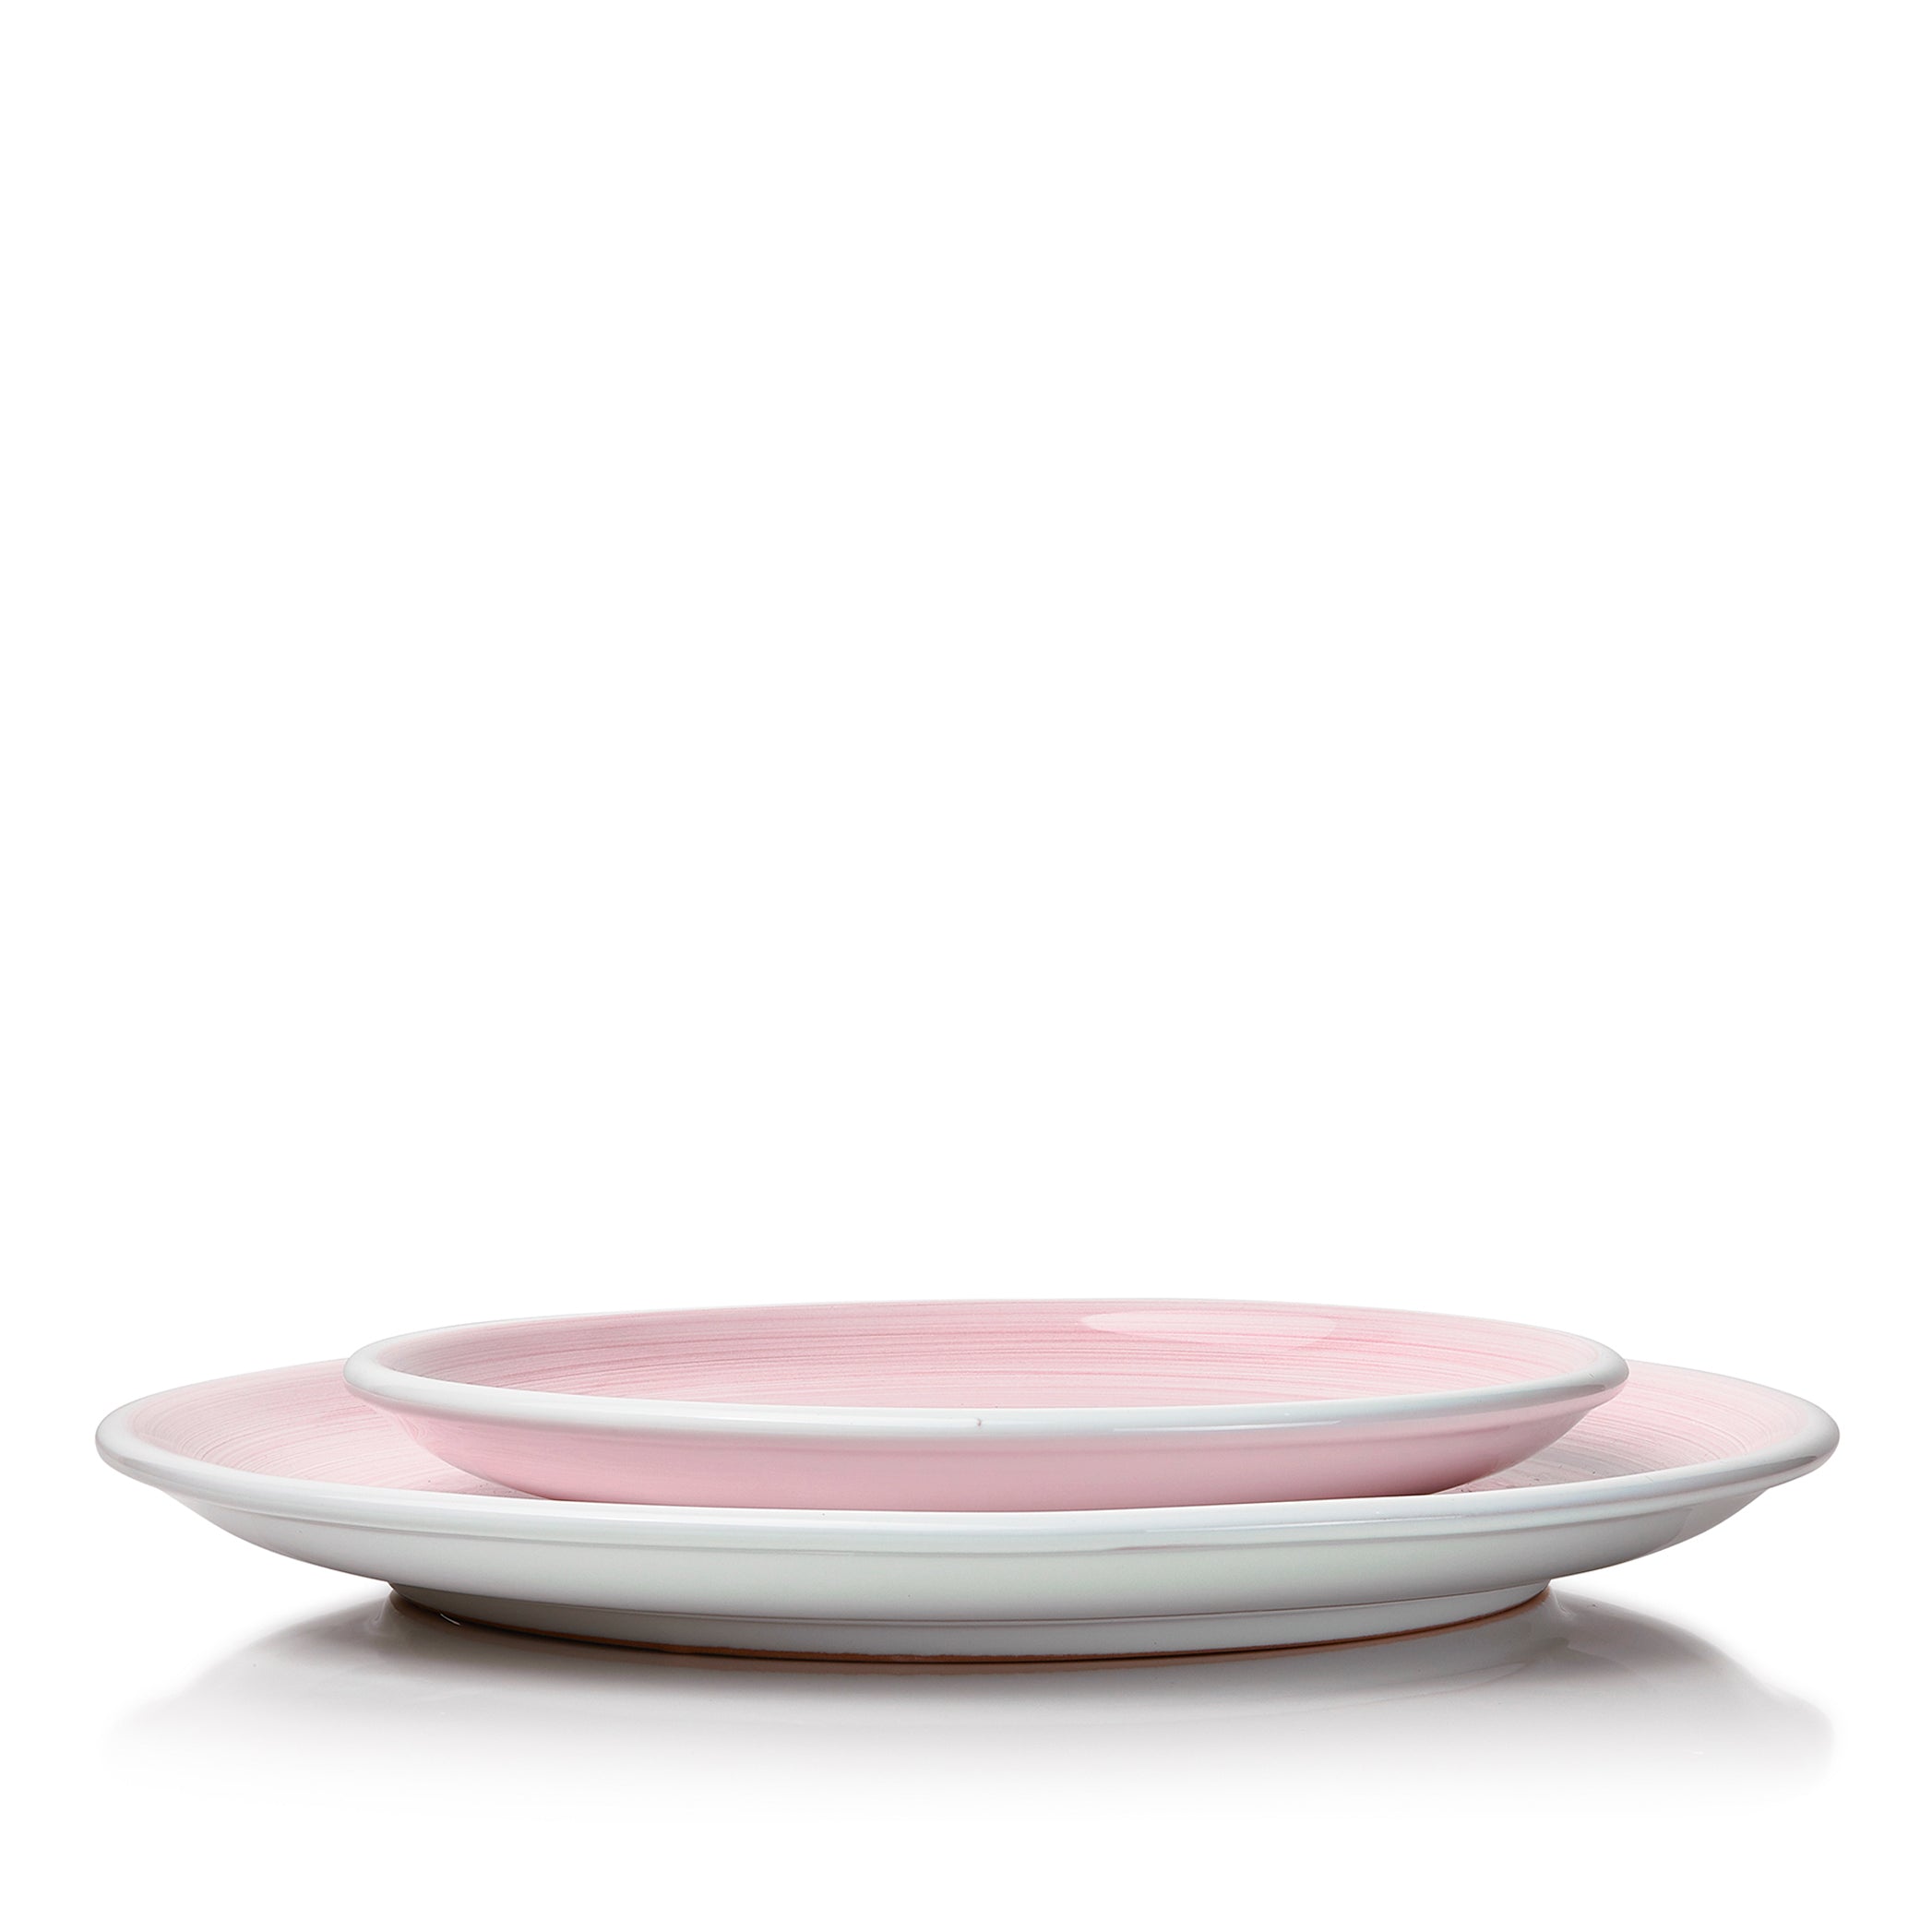 S&B 'Brushed' Ceramic Side Plate in Pastel Pink, 21cm